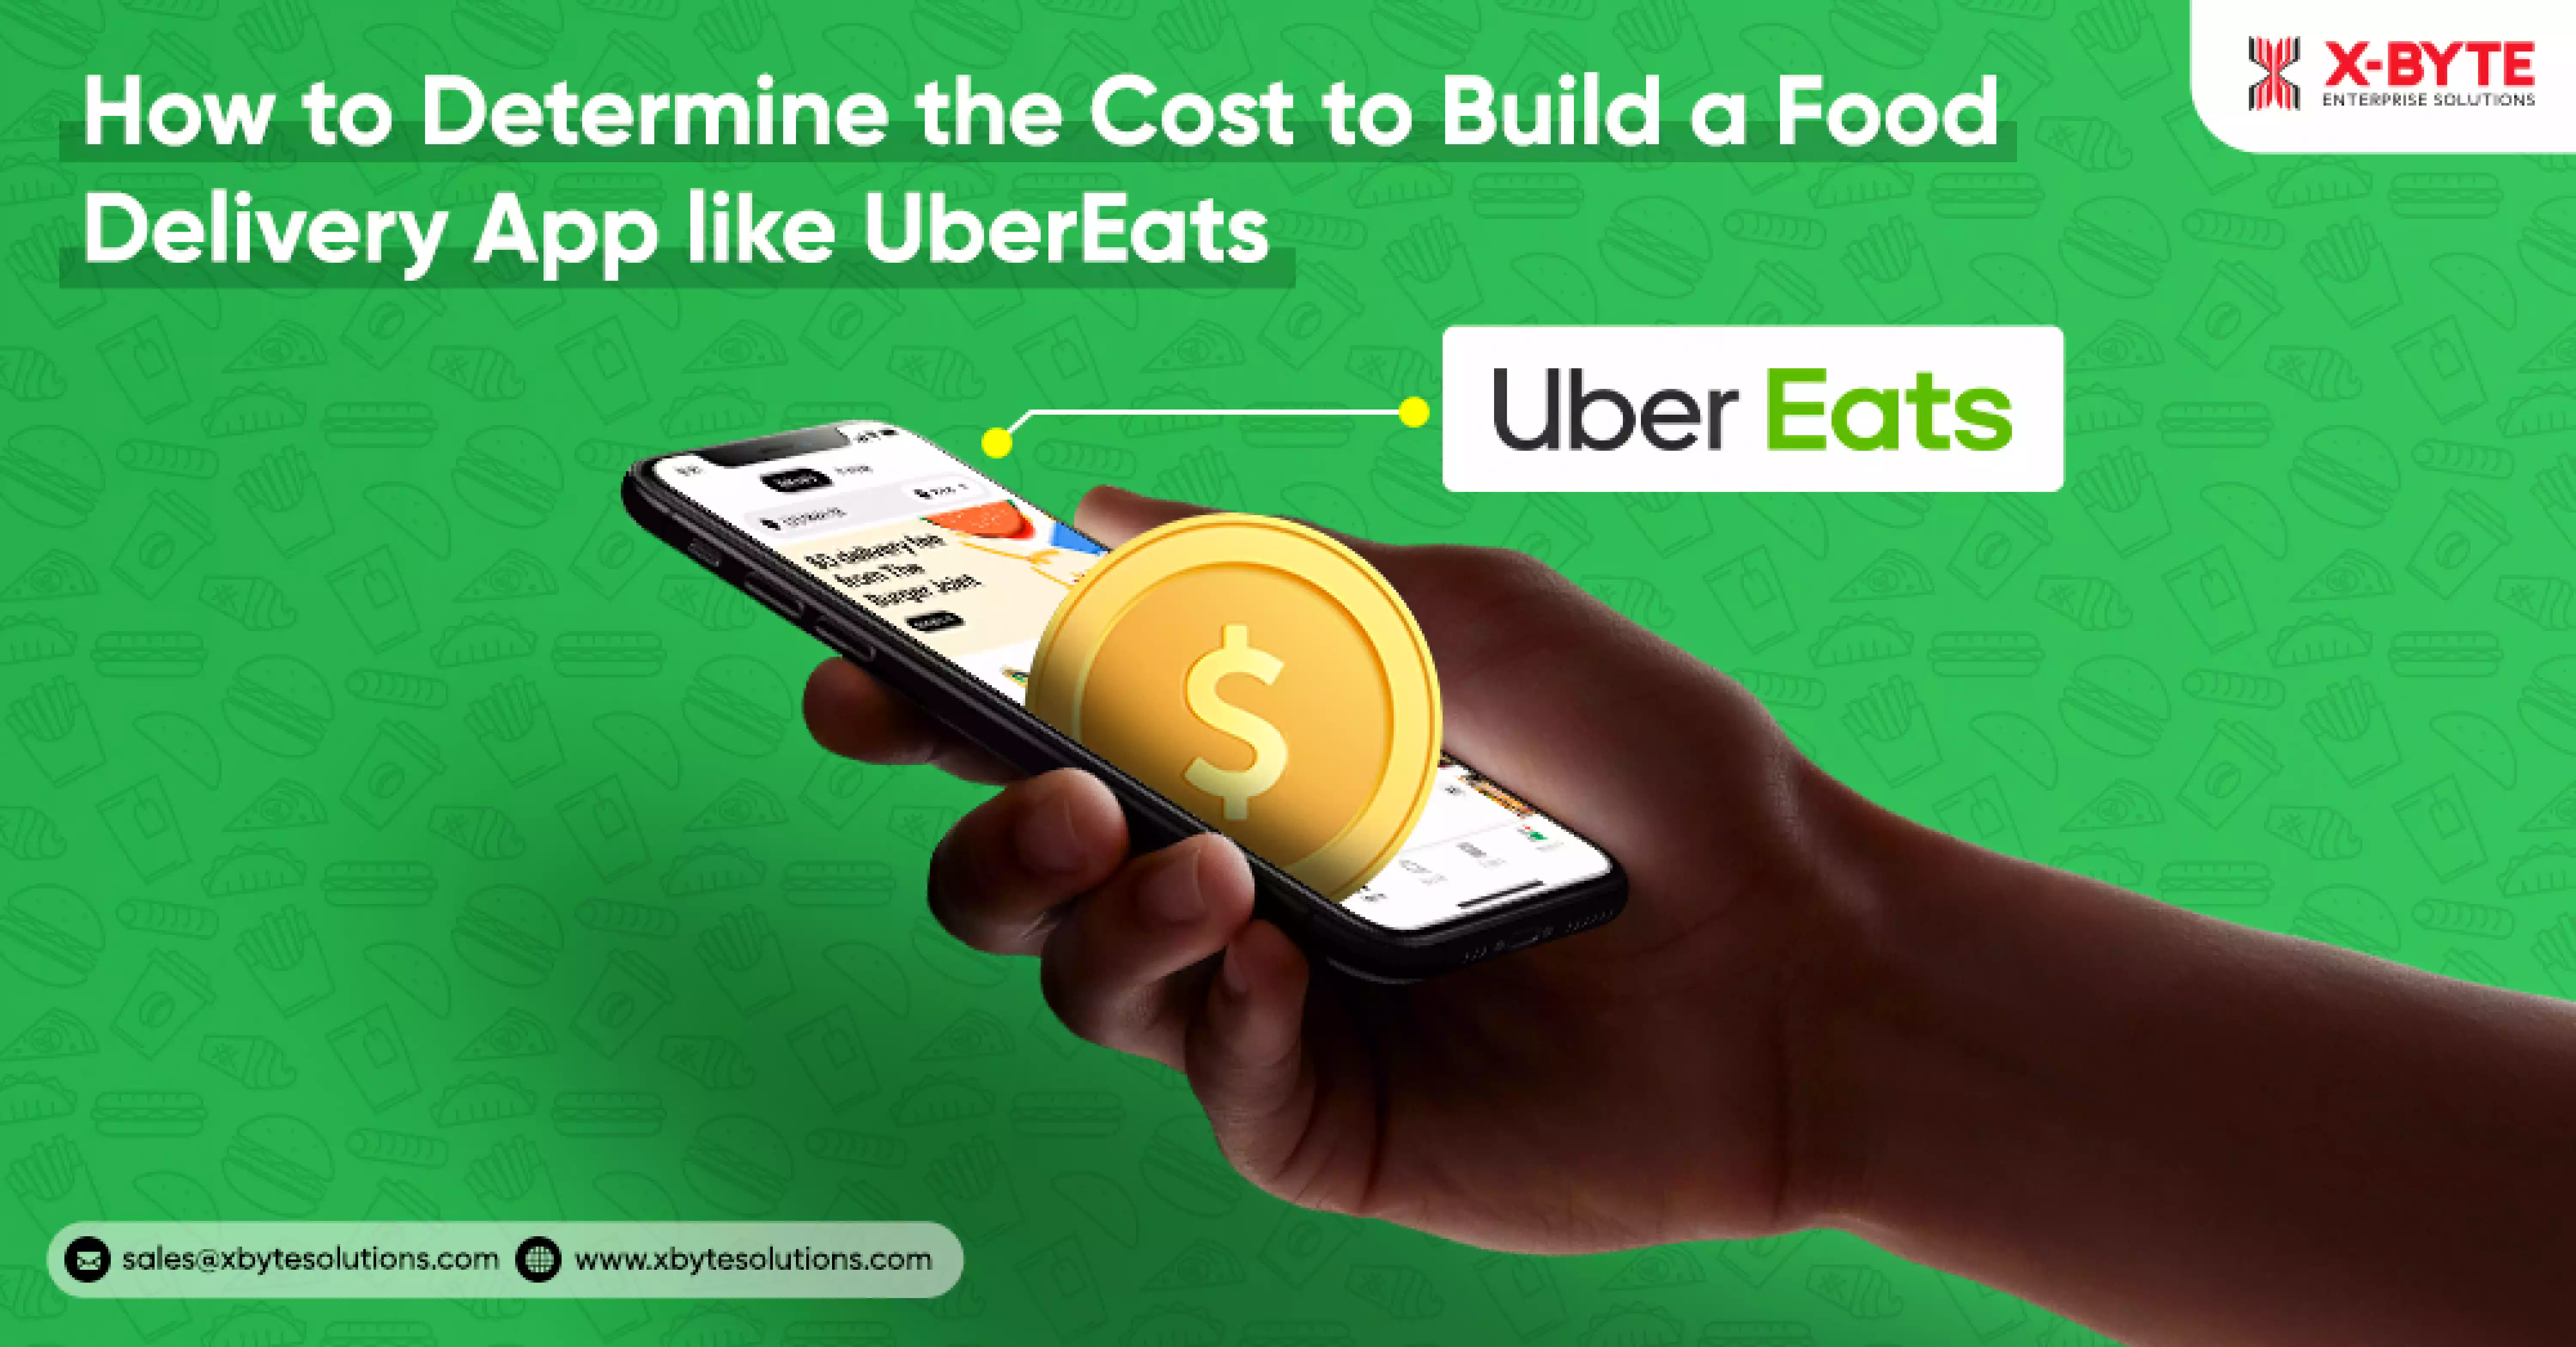 How to Determine the Cost to Build a Food Delivery App like UberEats